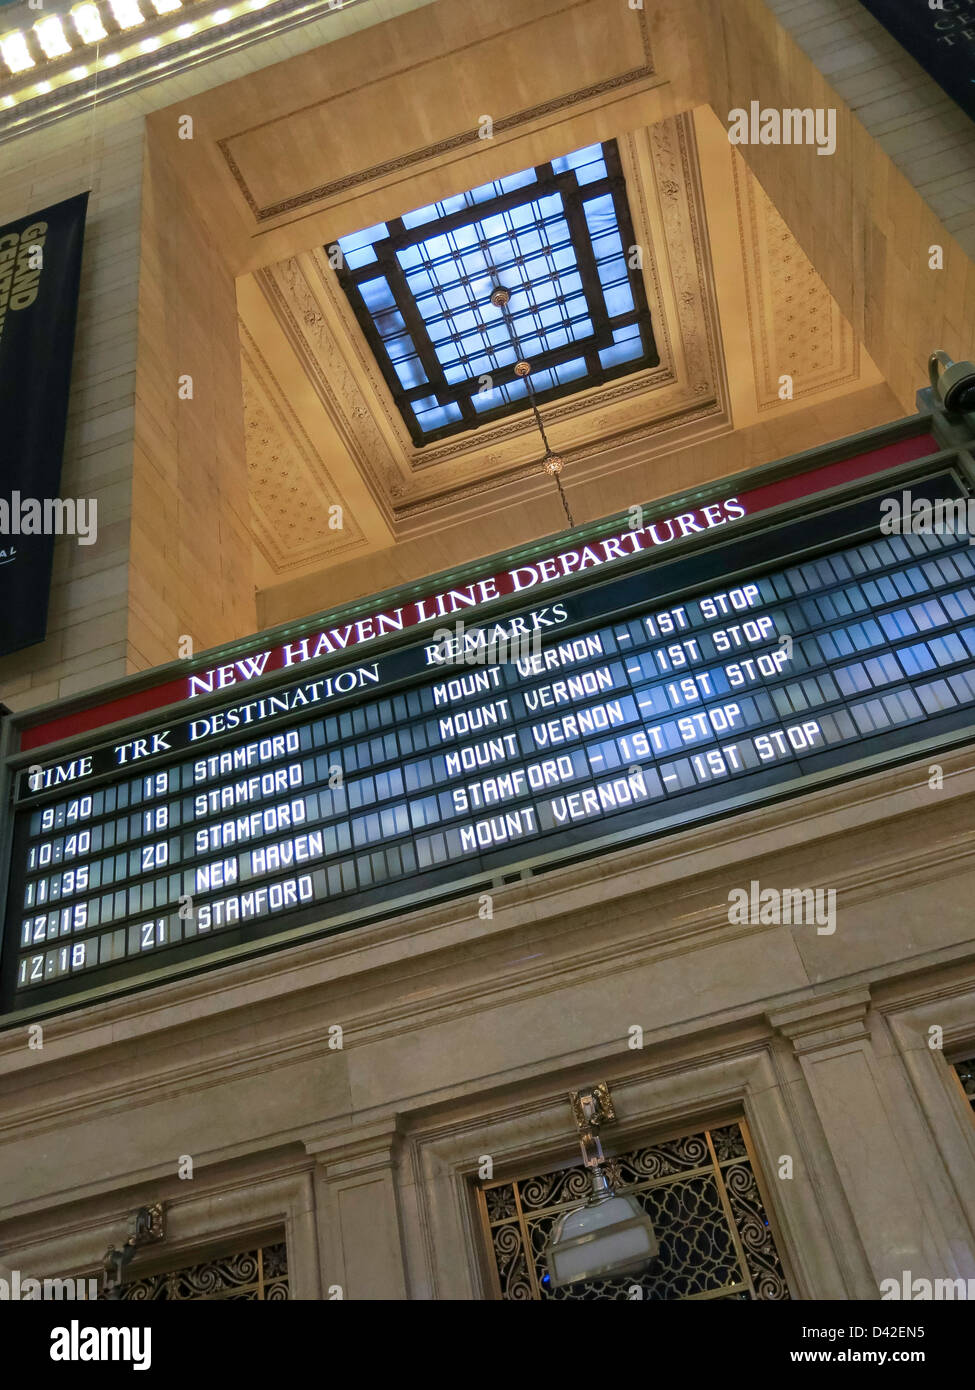 Metro North New Haven Line Departure Board, Main Concourse, Grand Central  Station, NYC Stock Photo - Alamy